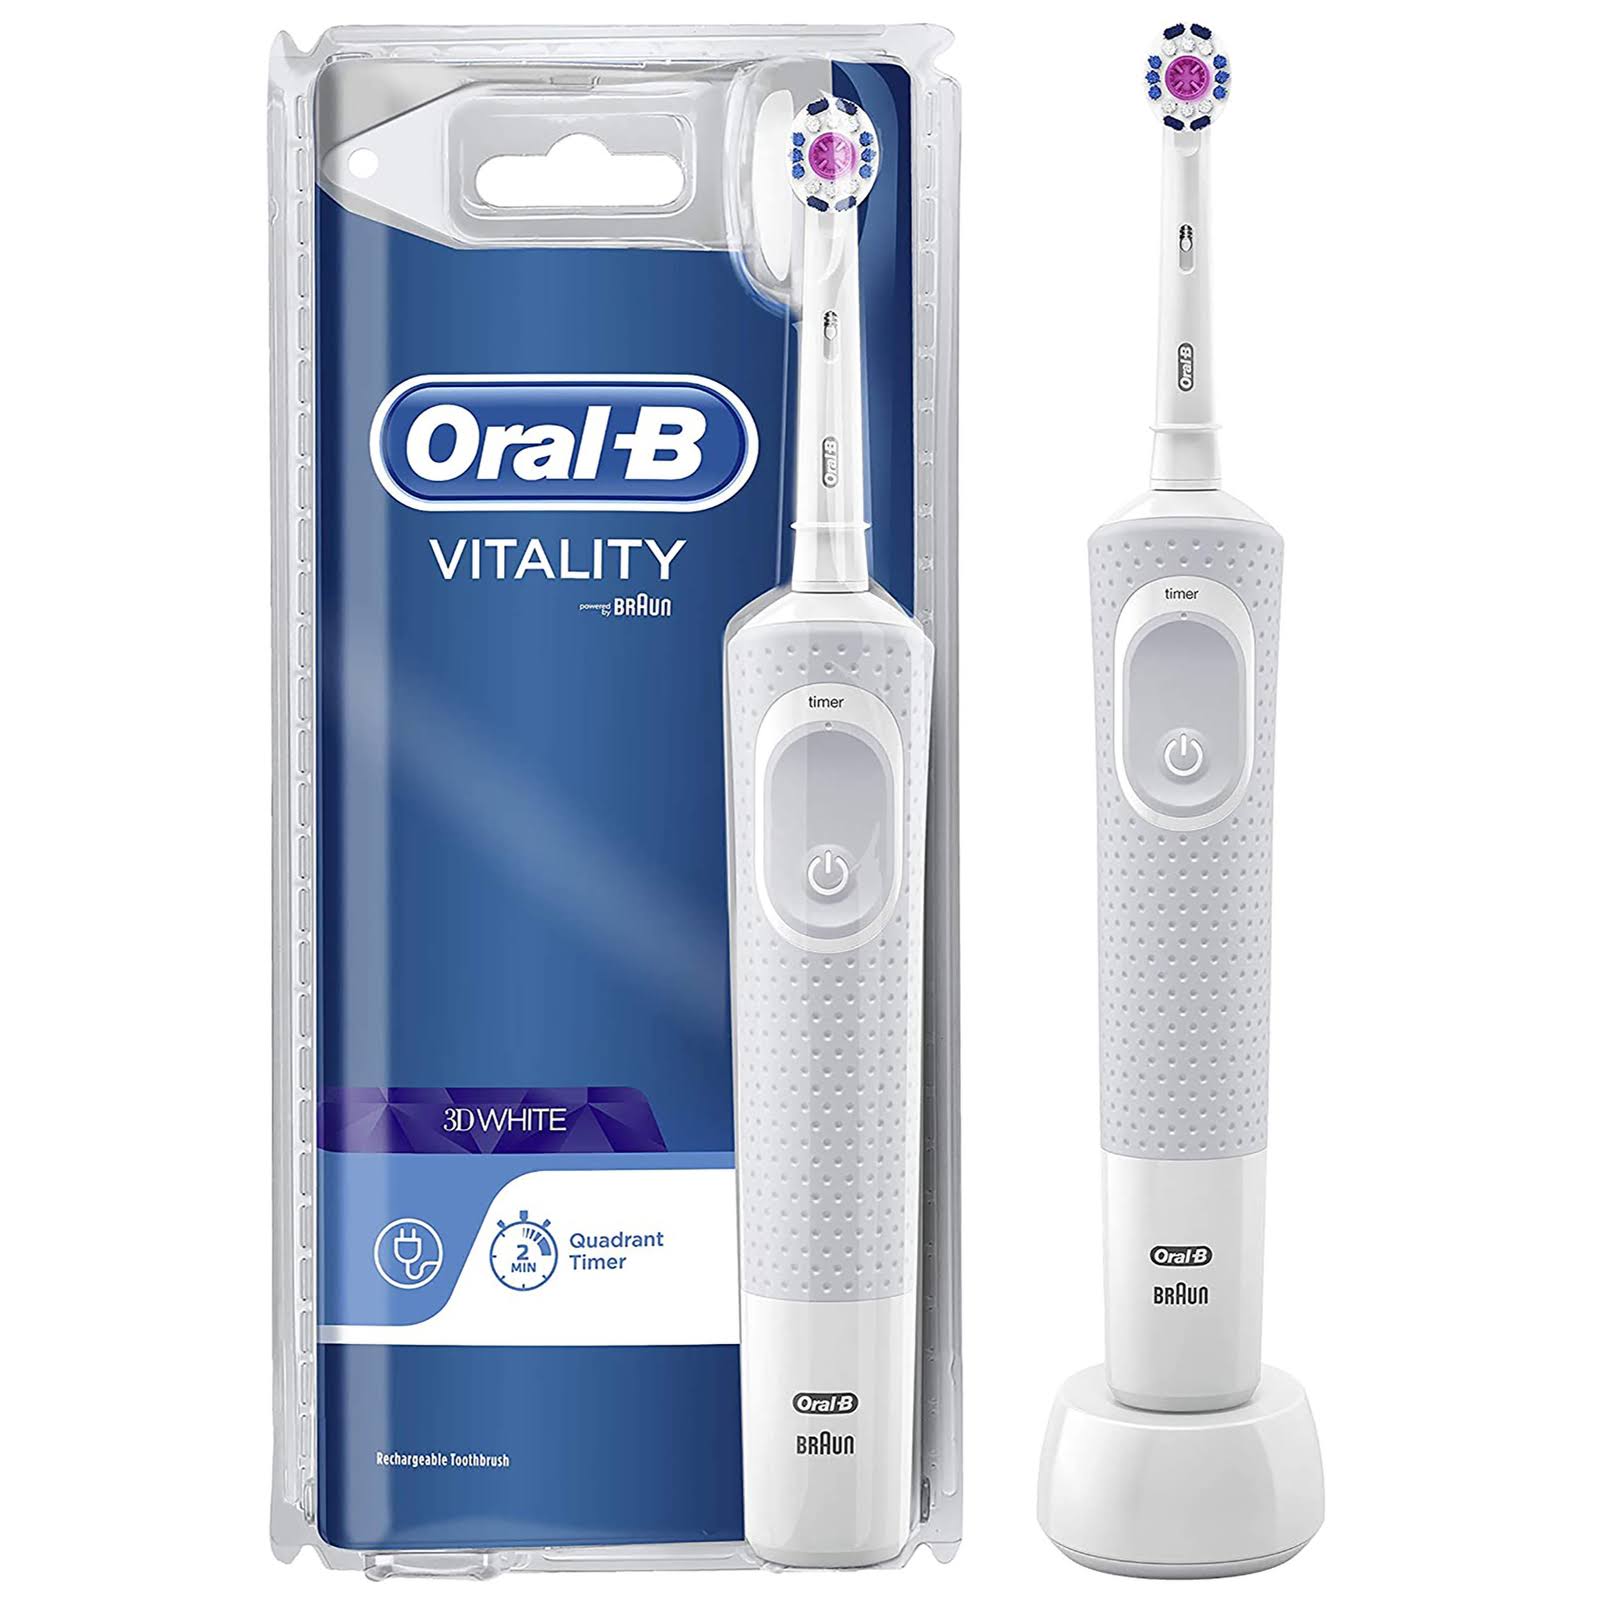 Oral-B Vitality 2D Action White and Clean Rechargeable Electric Toothbrush